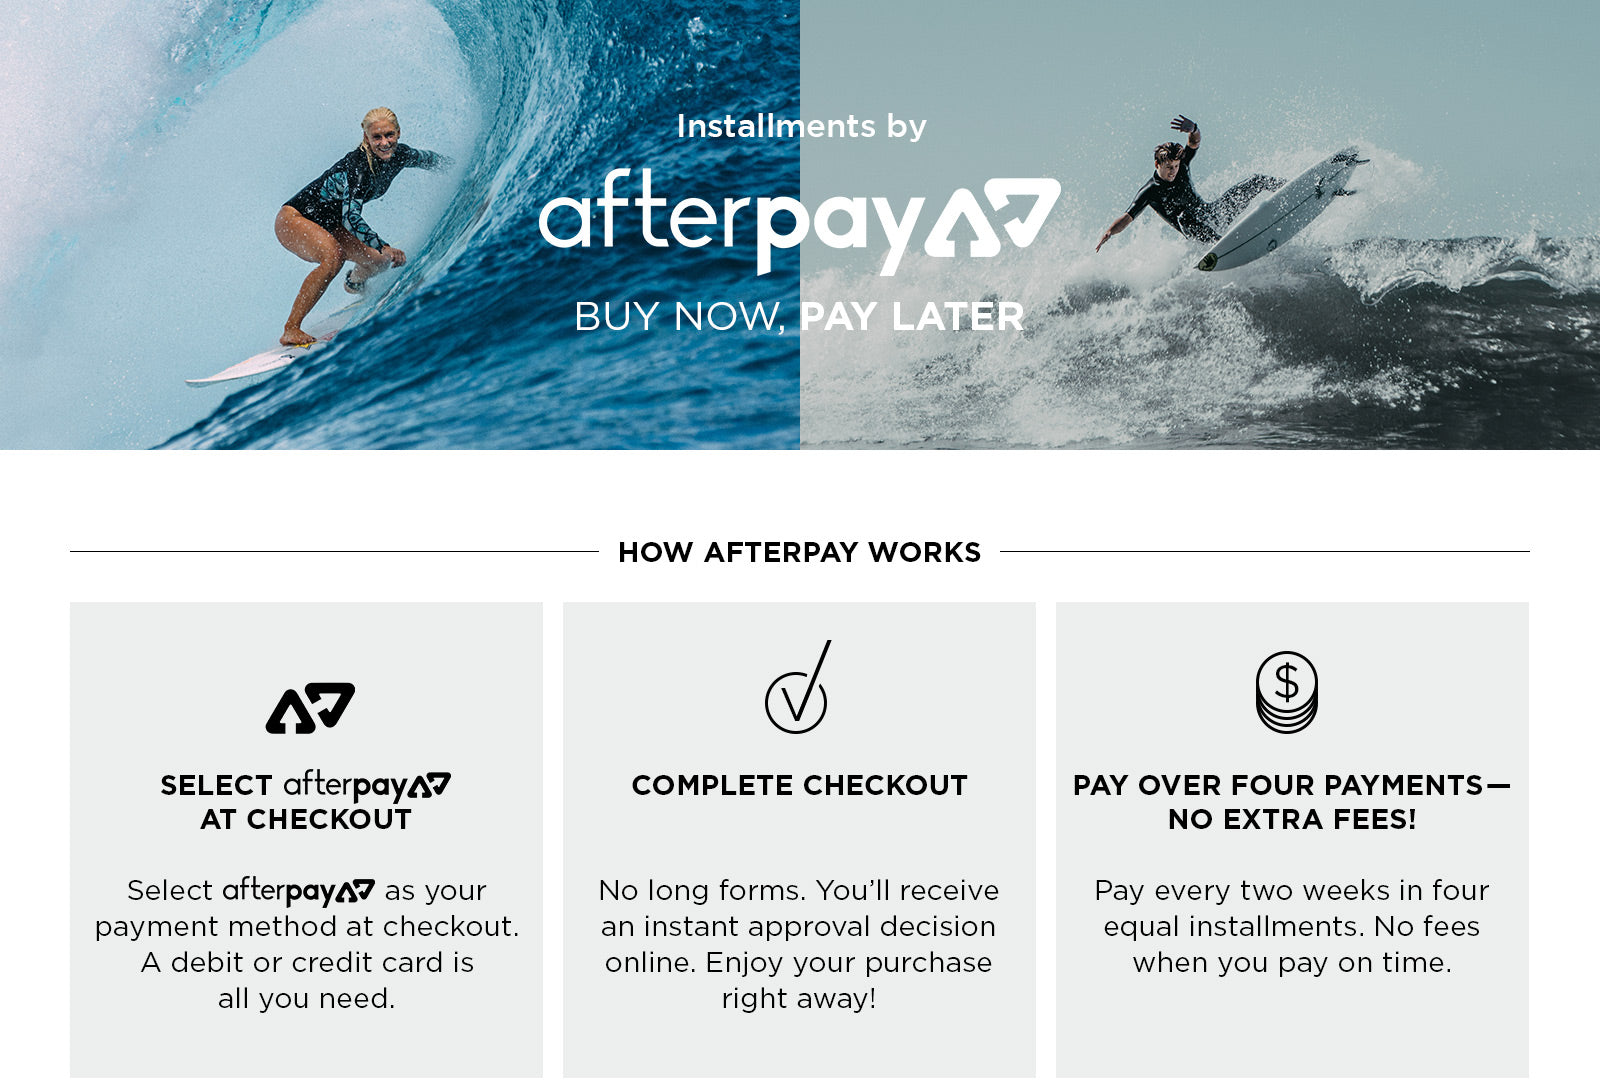 Afterpay - Buy now, pay later>